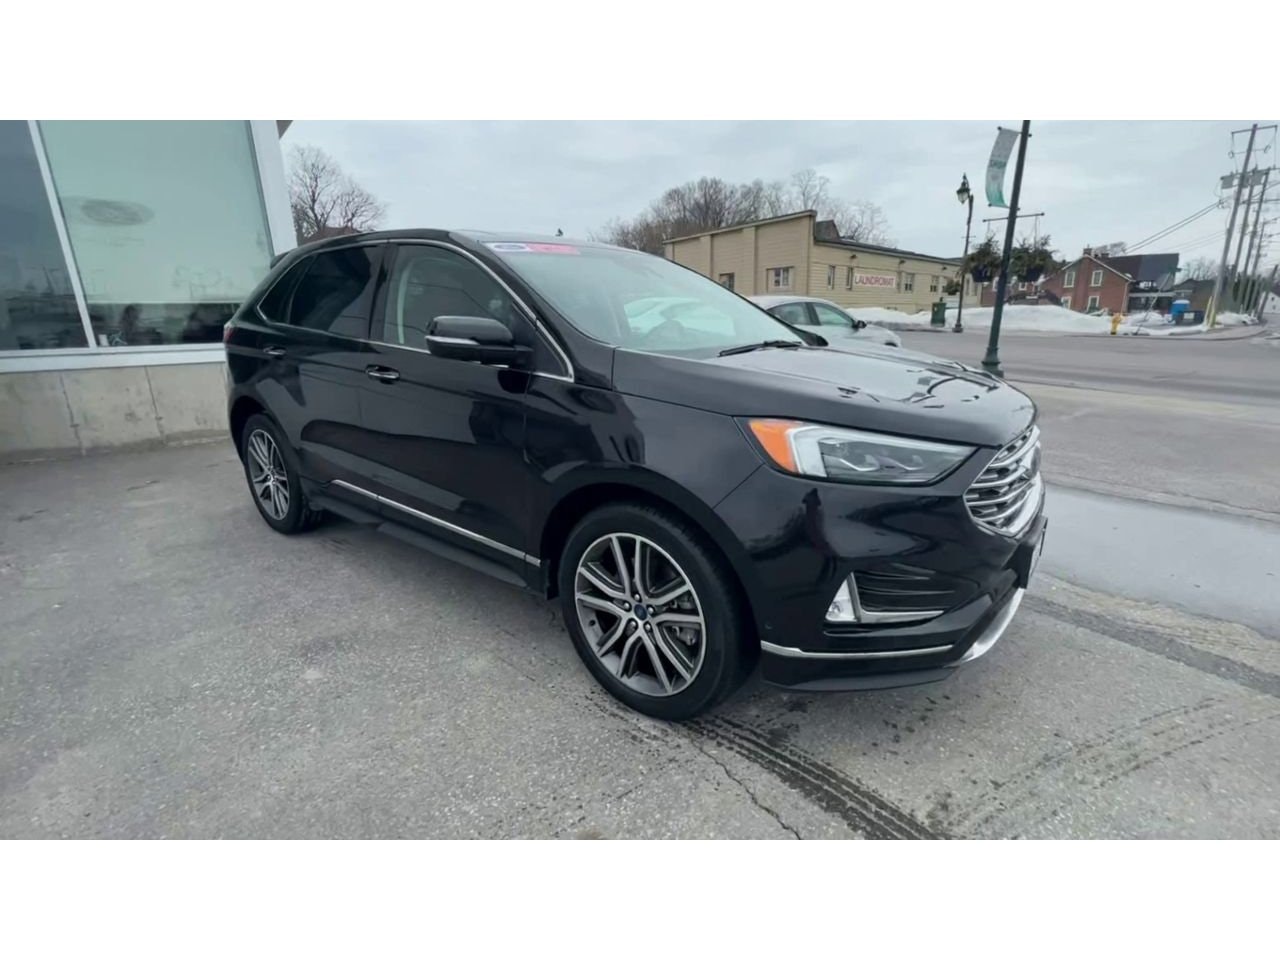 2019 Ford Edge - 20756A Full Image 2